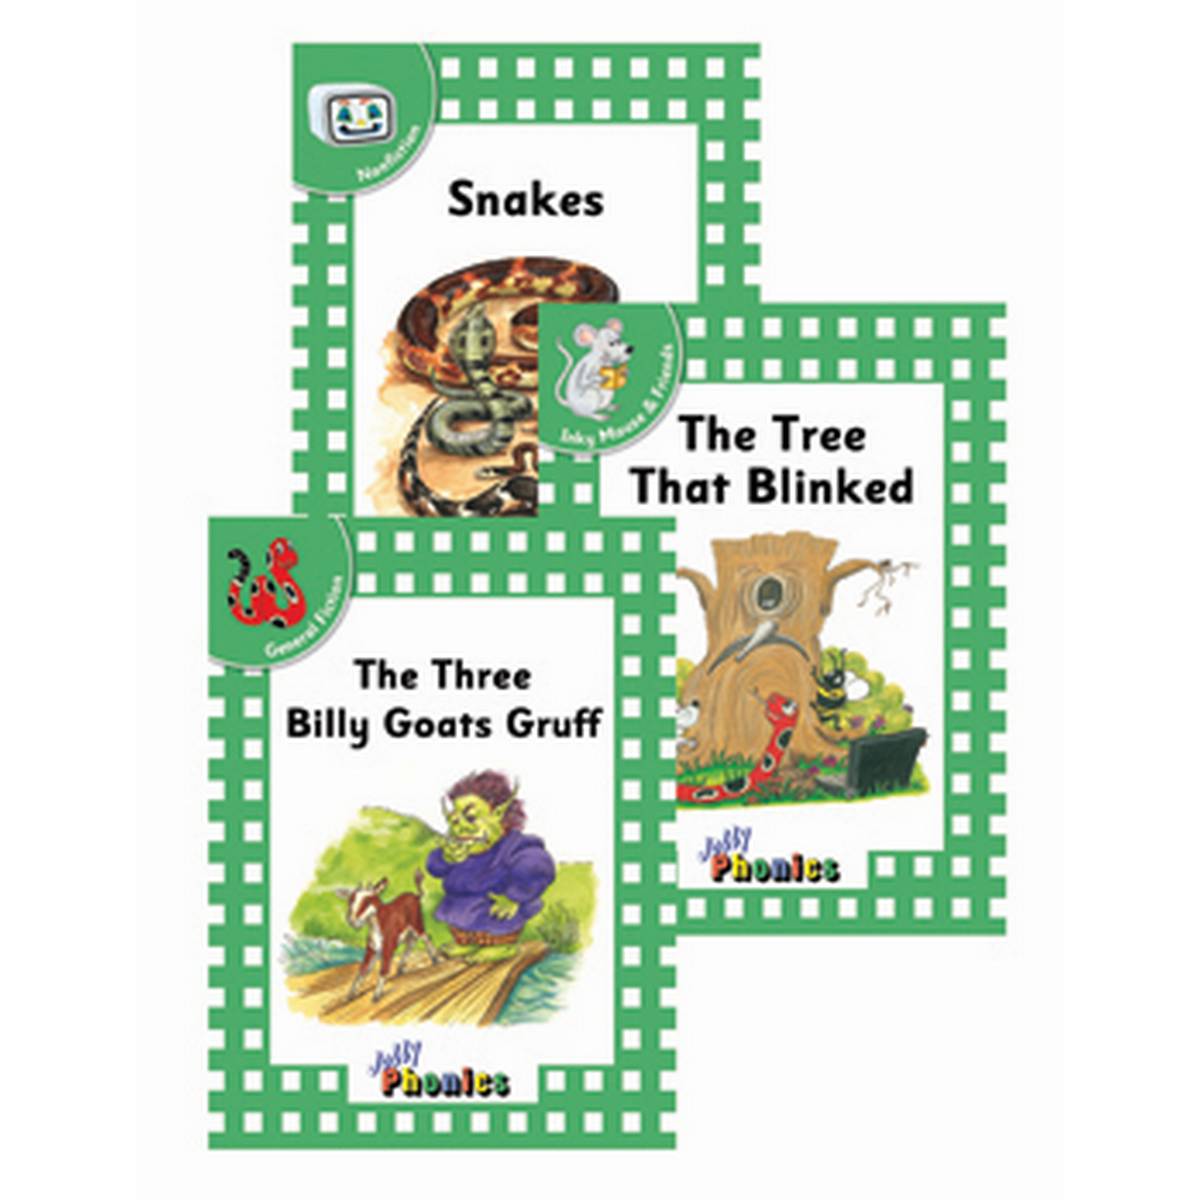 Jolly Phonics Readers Level 3 Complete Set (In Print Letters)